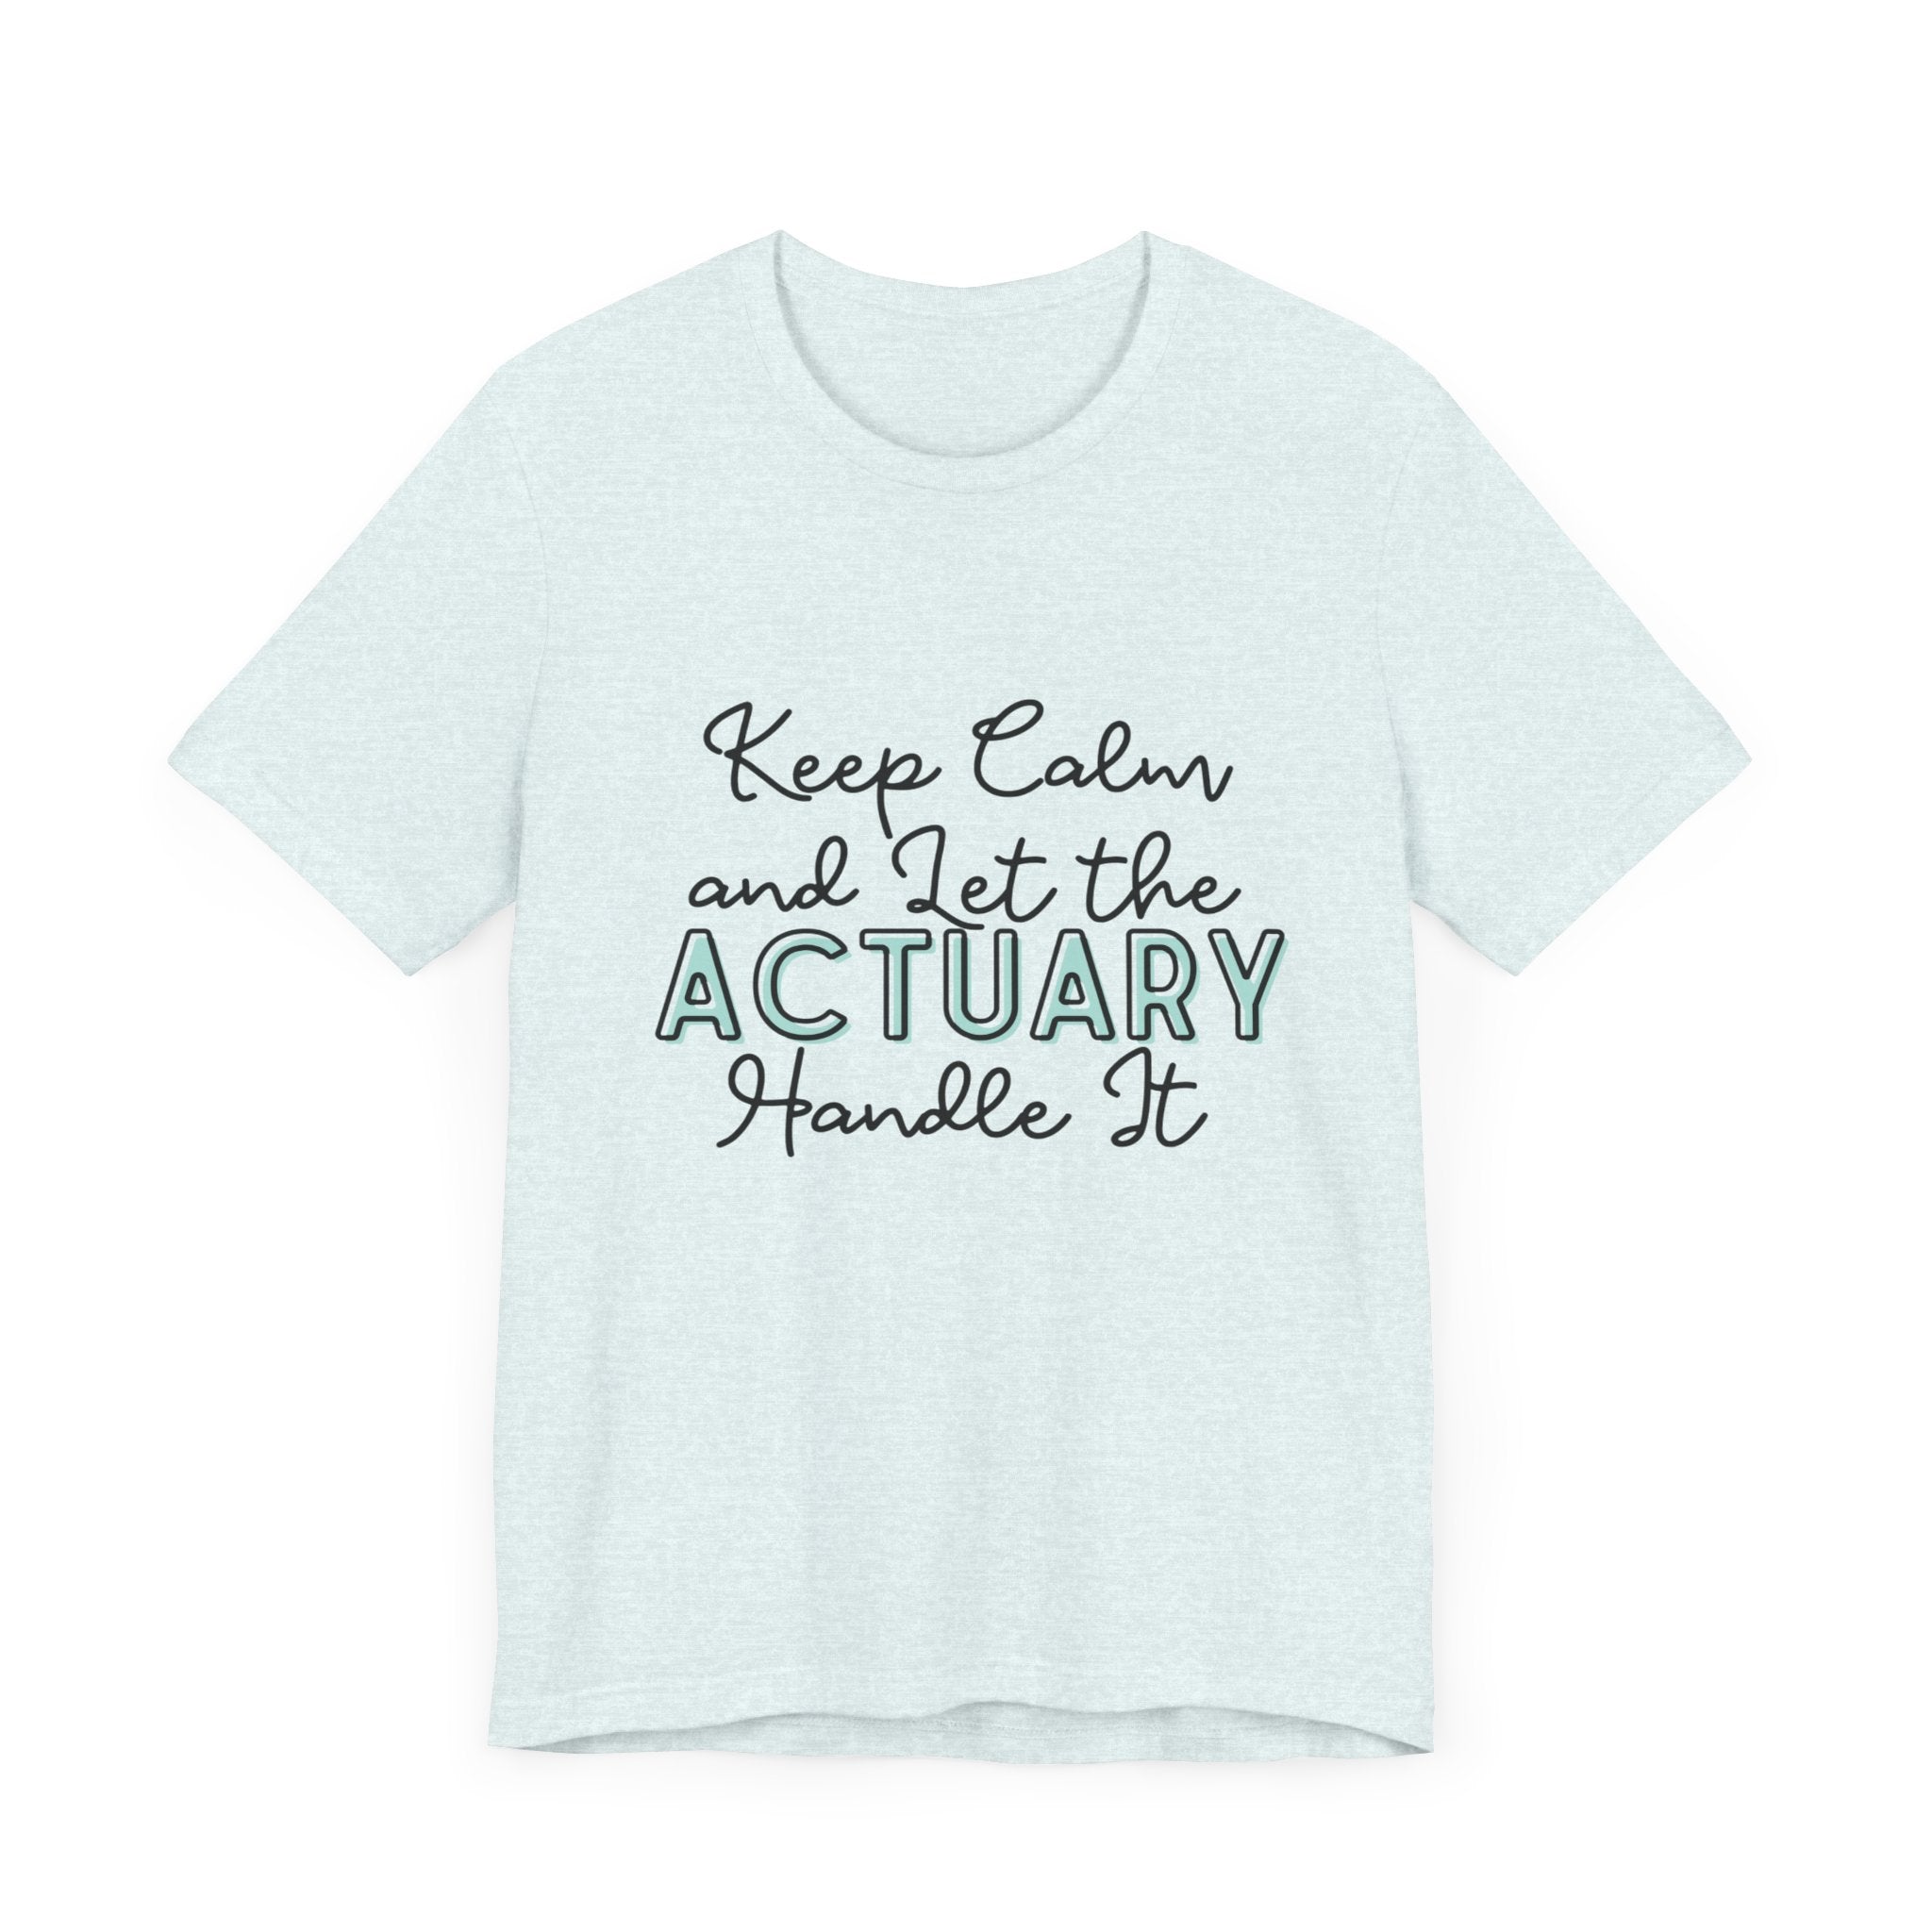 Keep Calm and let the Actuary handle It - Jersey Short Sleeve Tee